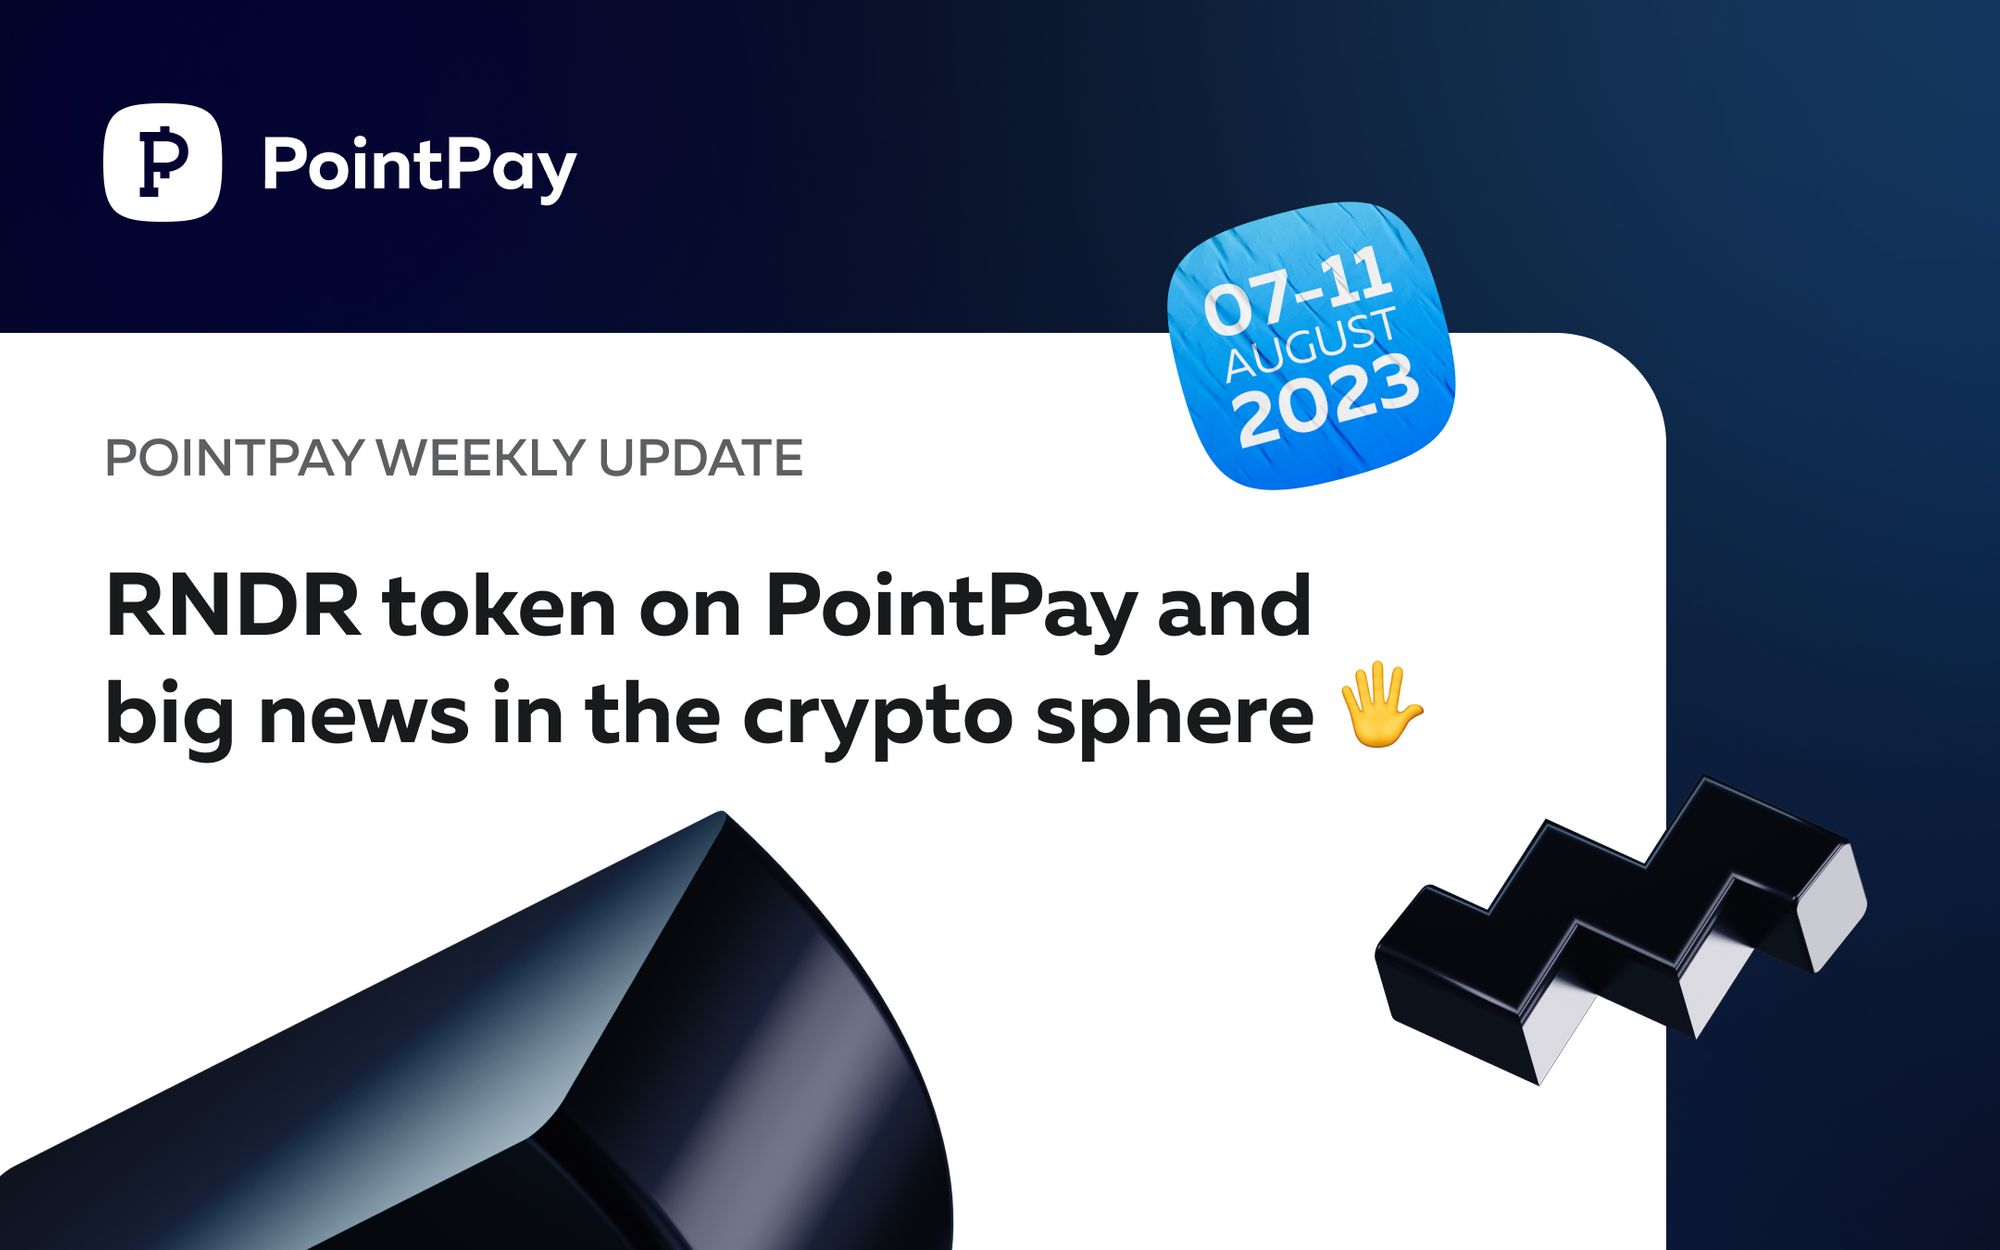 PointPay Weekly Update (7 - 11 August 2023)